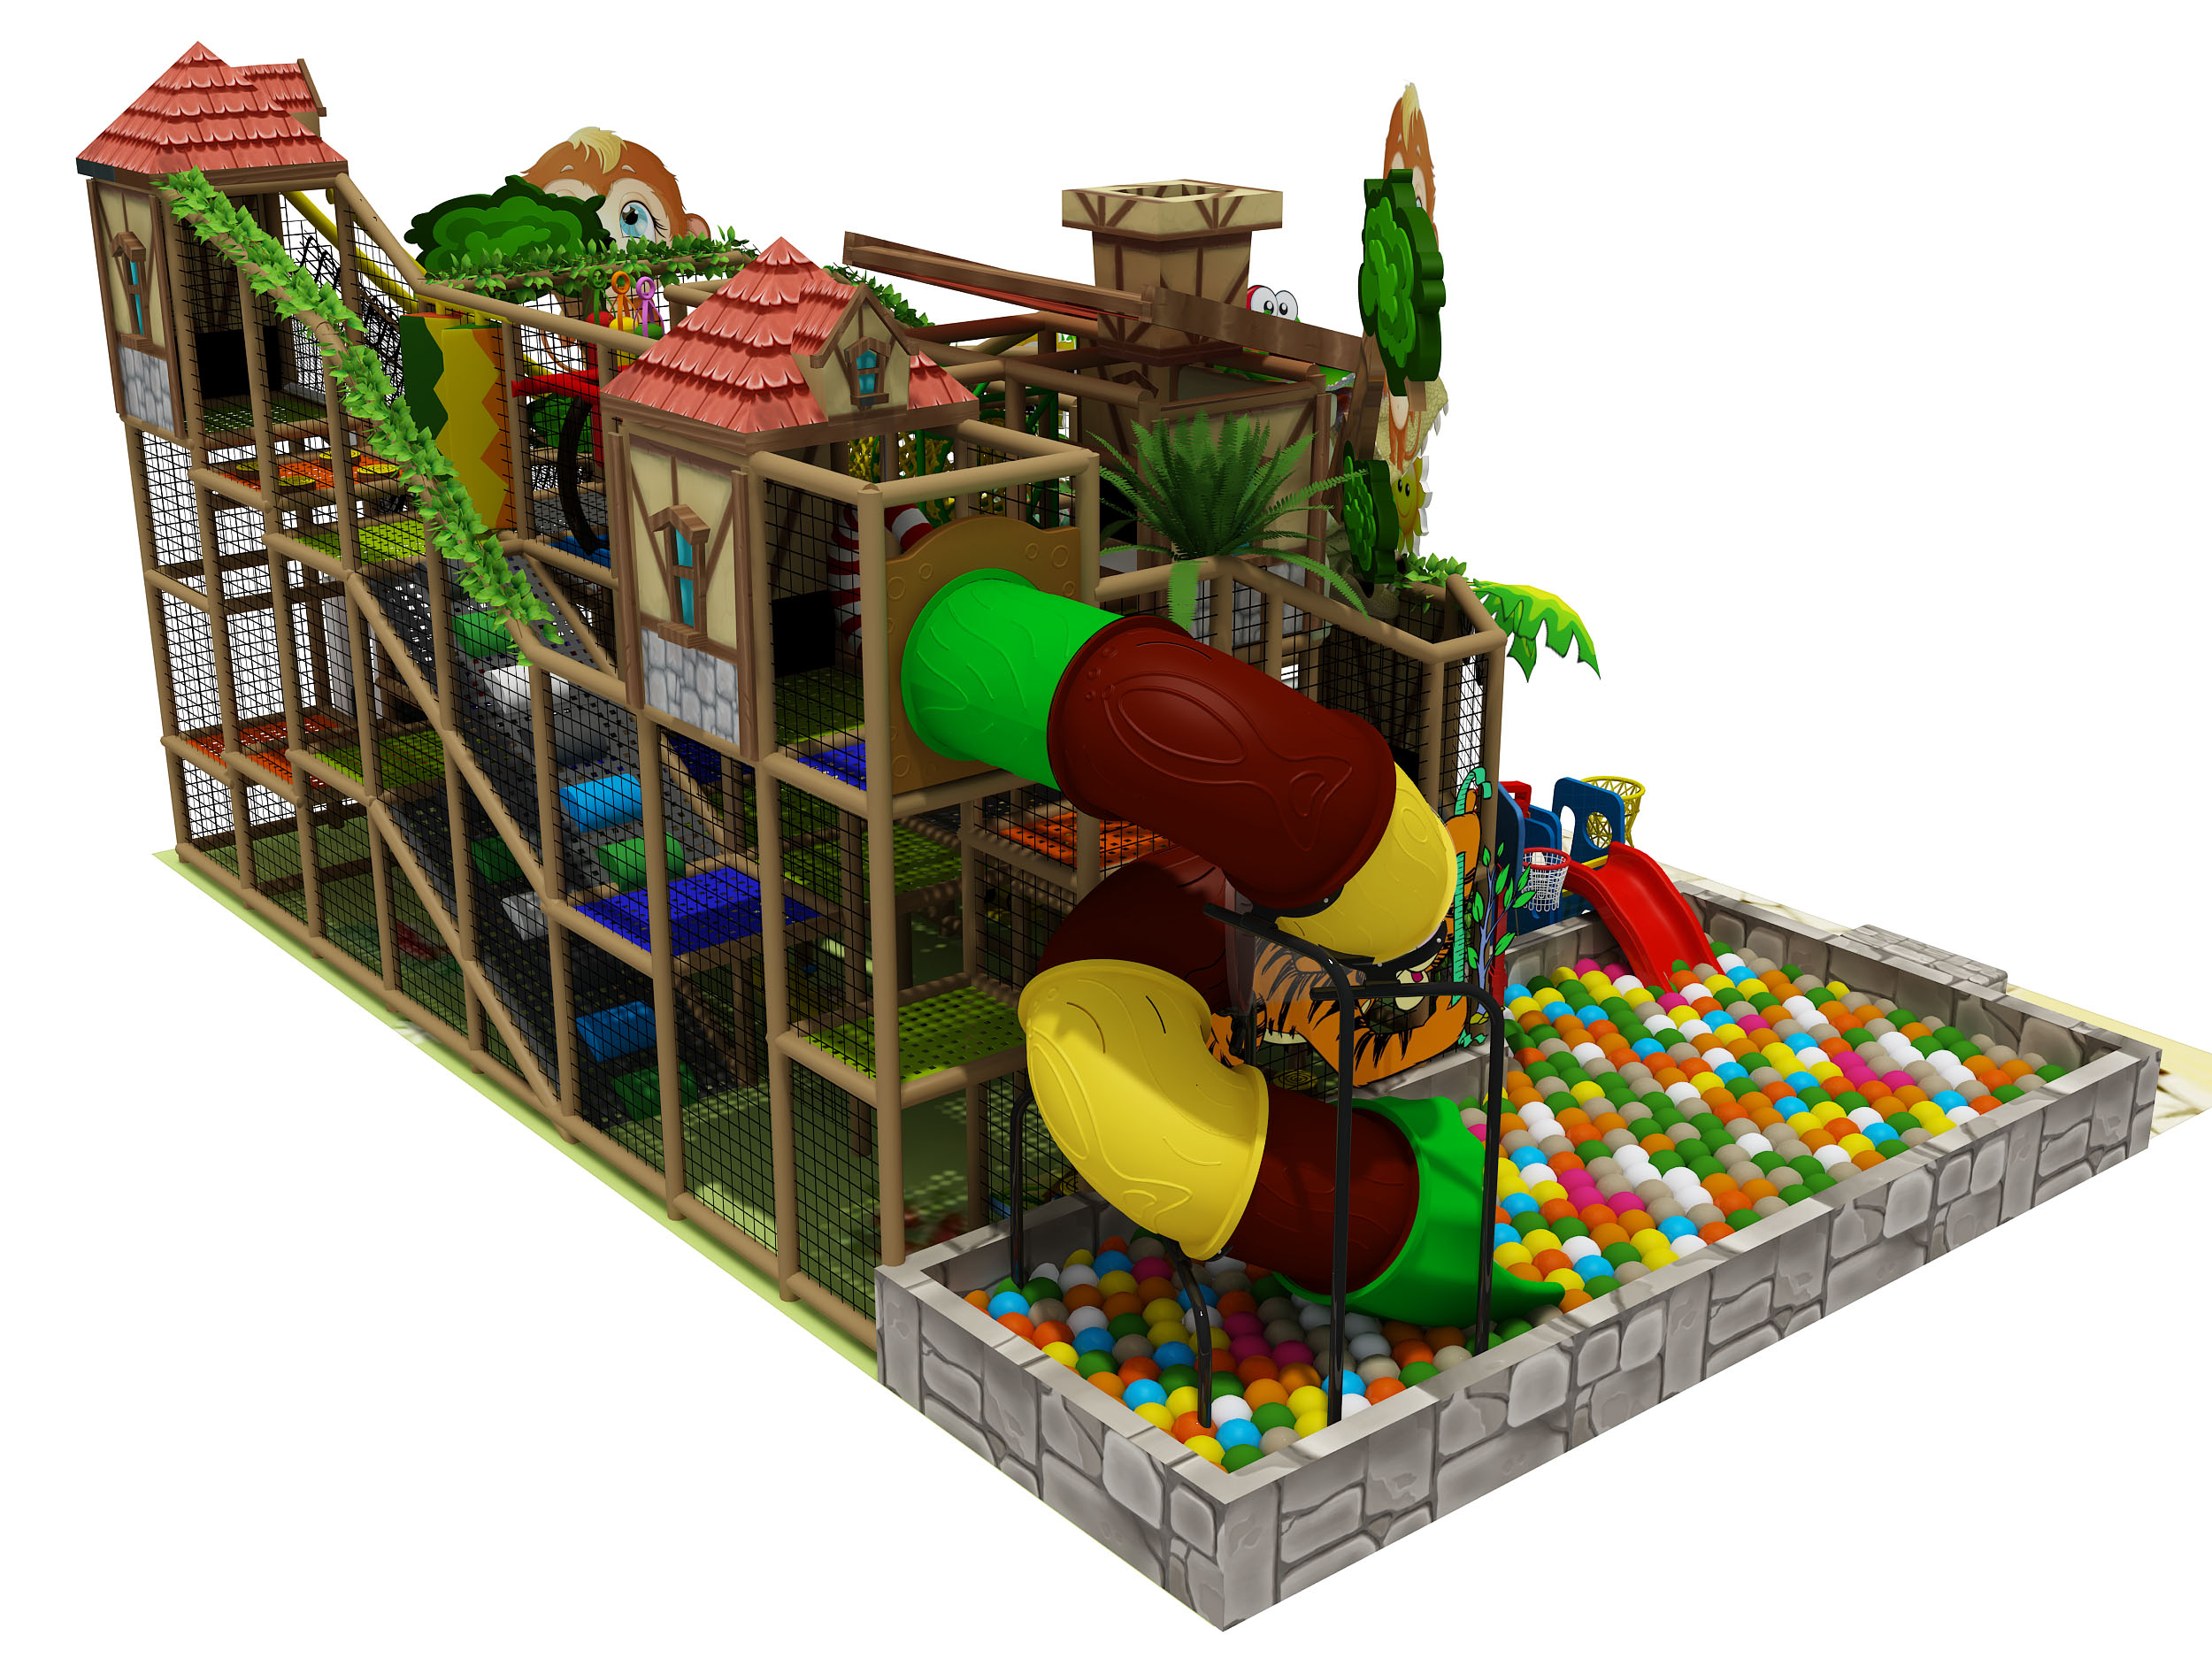 The Jungle Theme Toddler Indoor Play Center